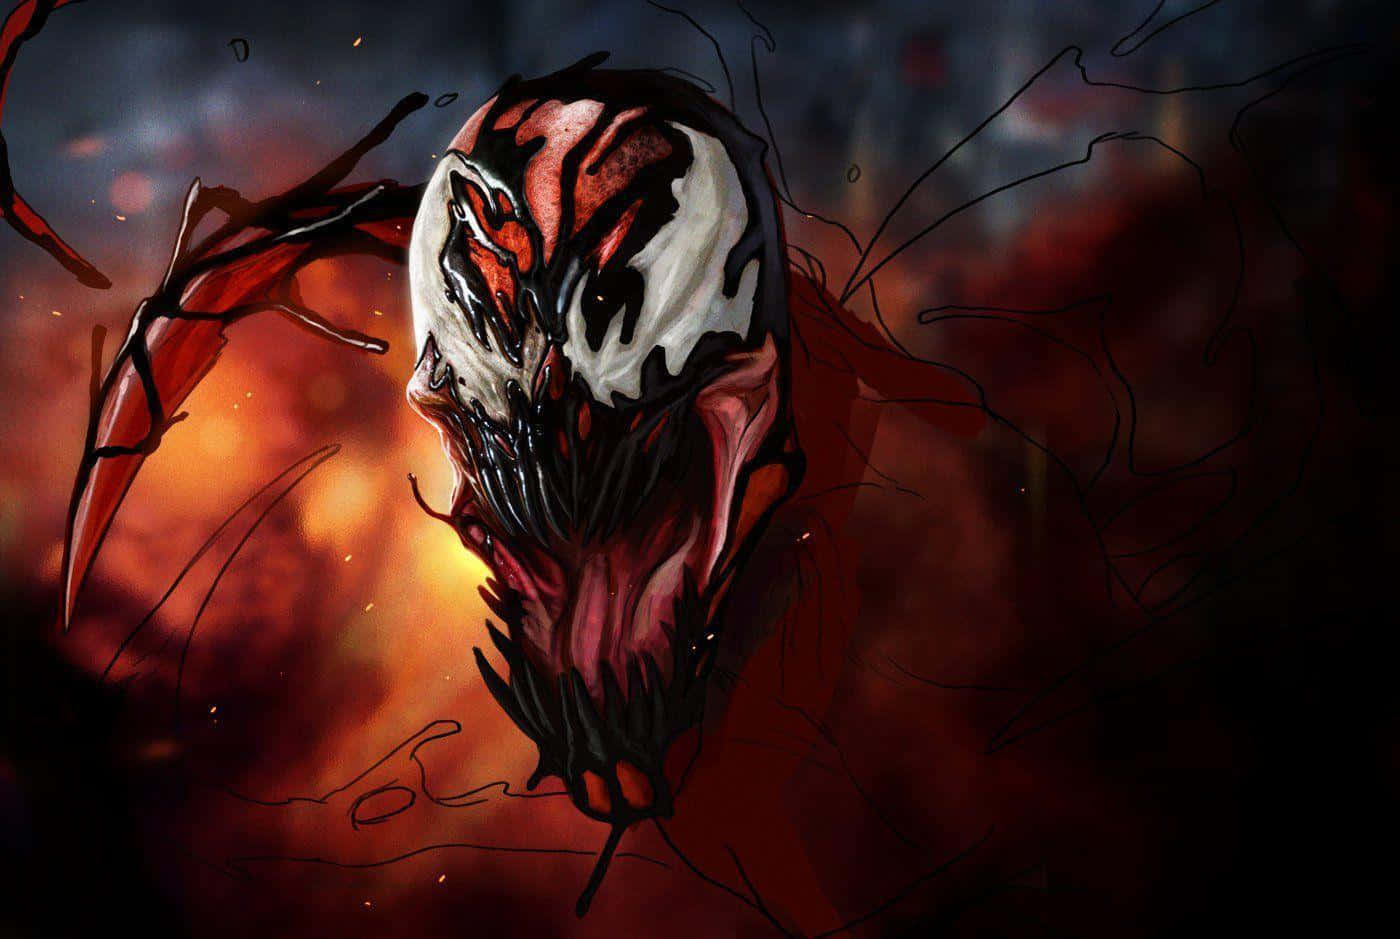 "Carnage - Ready to Unleash Chaos and Terror" Wallpaper